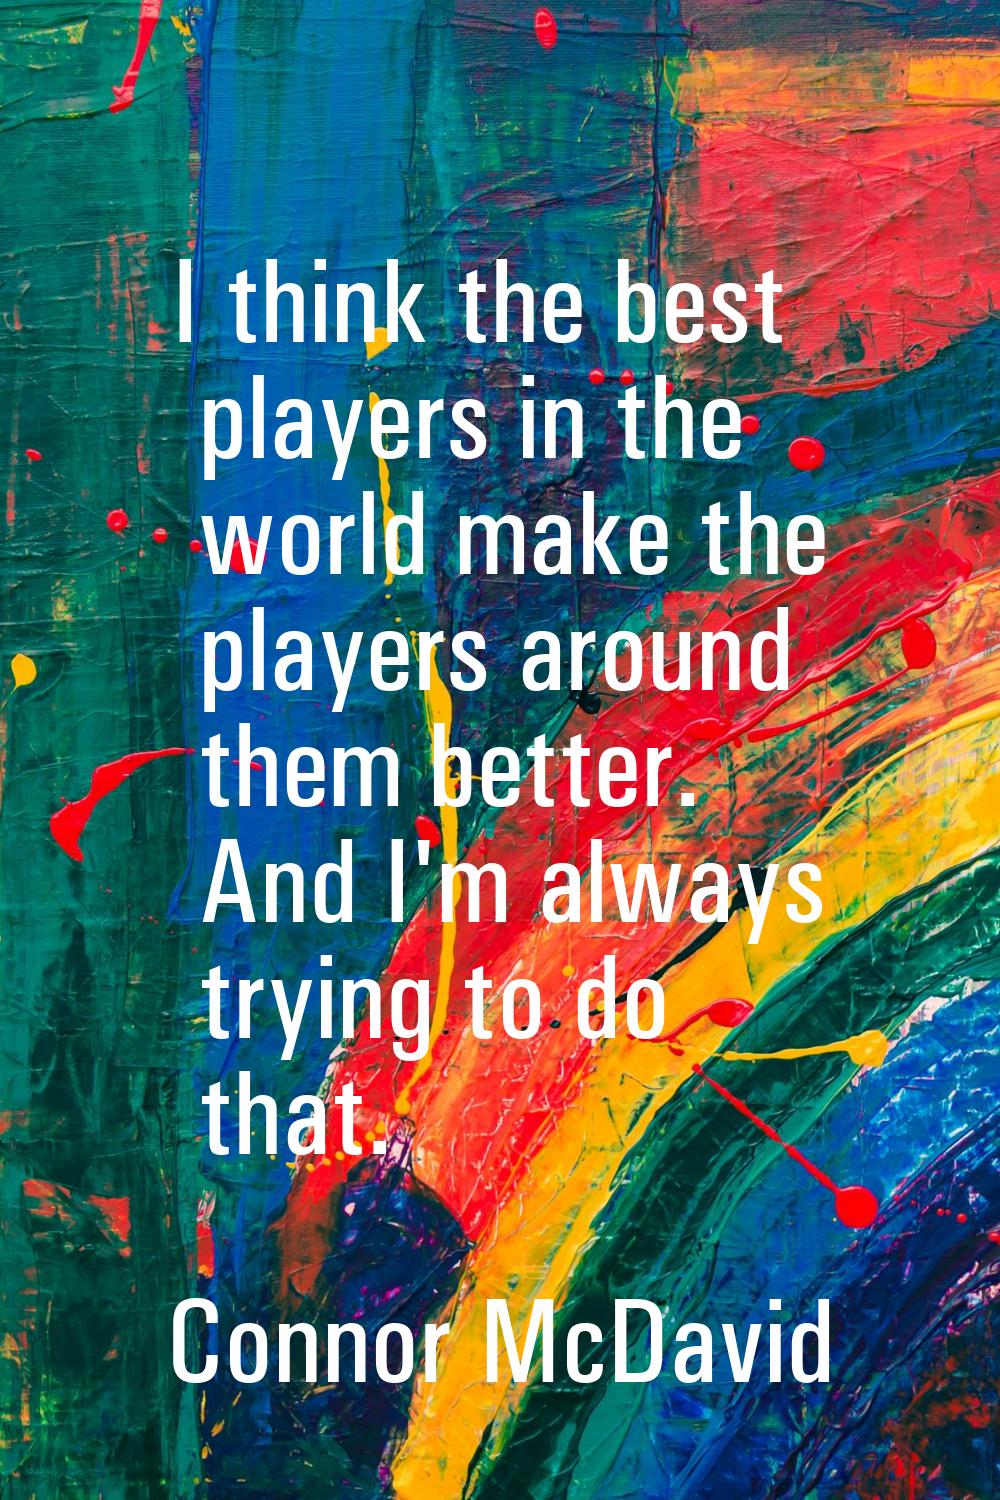 I think the best players in the world make the players around them better. And I'm always trying to